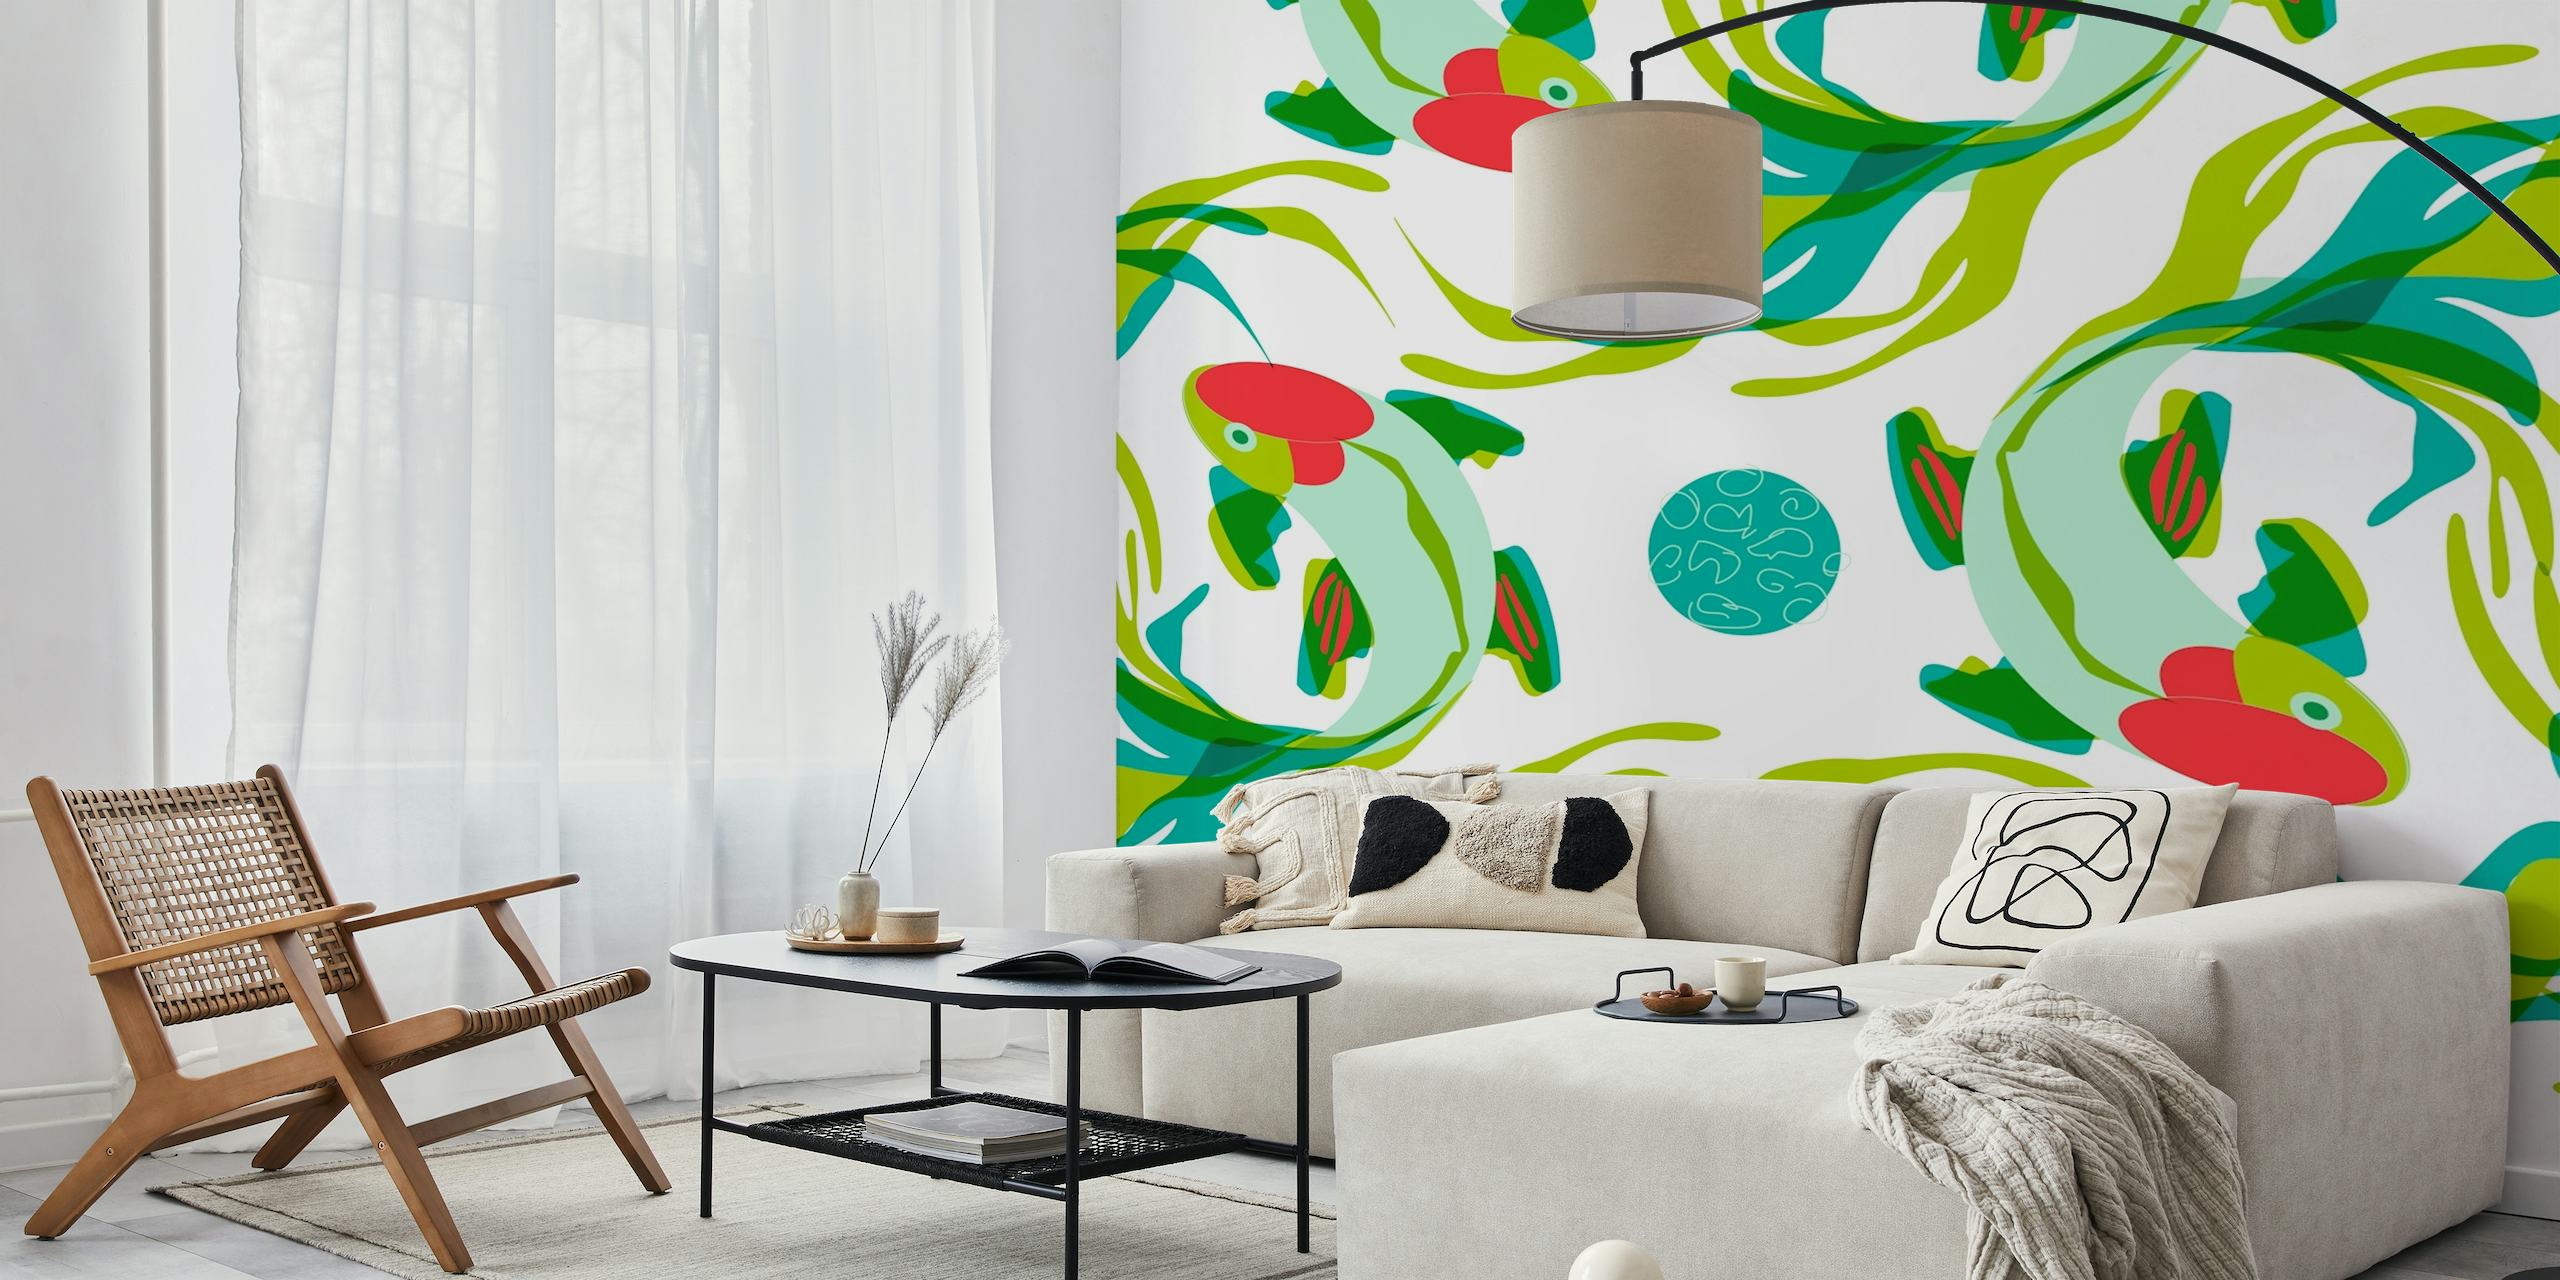 Artistic koi fish and greenery wall mural for tranquil interior decor.